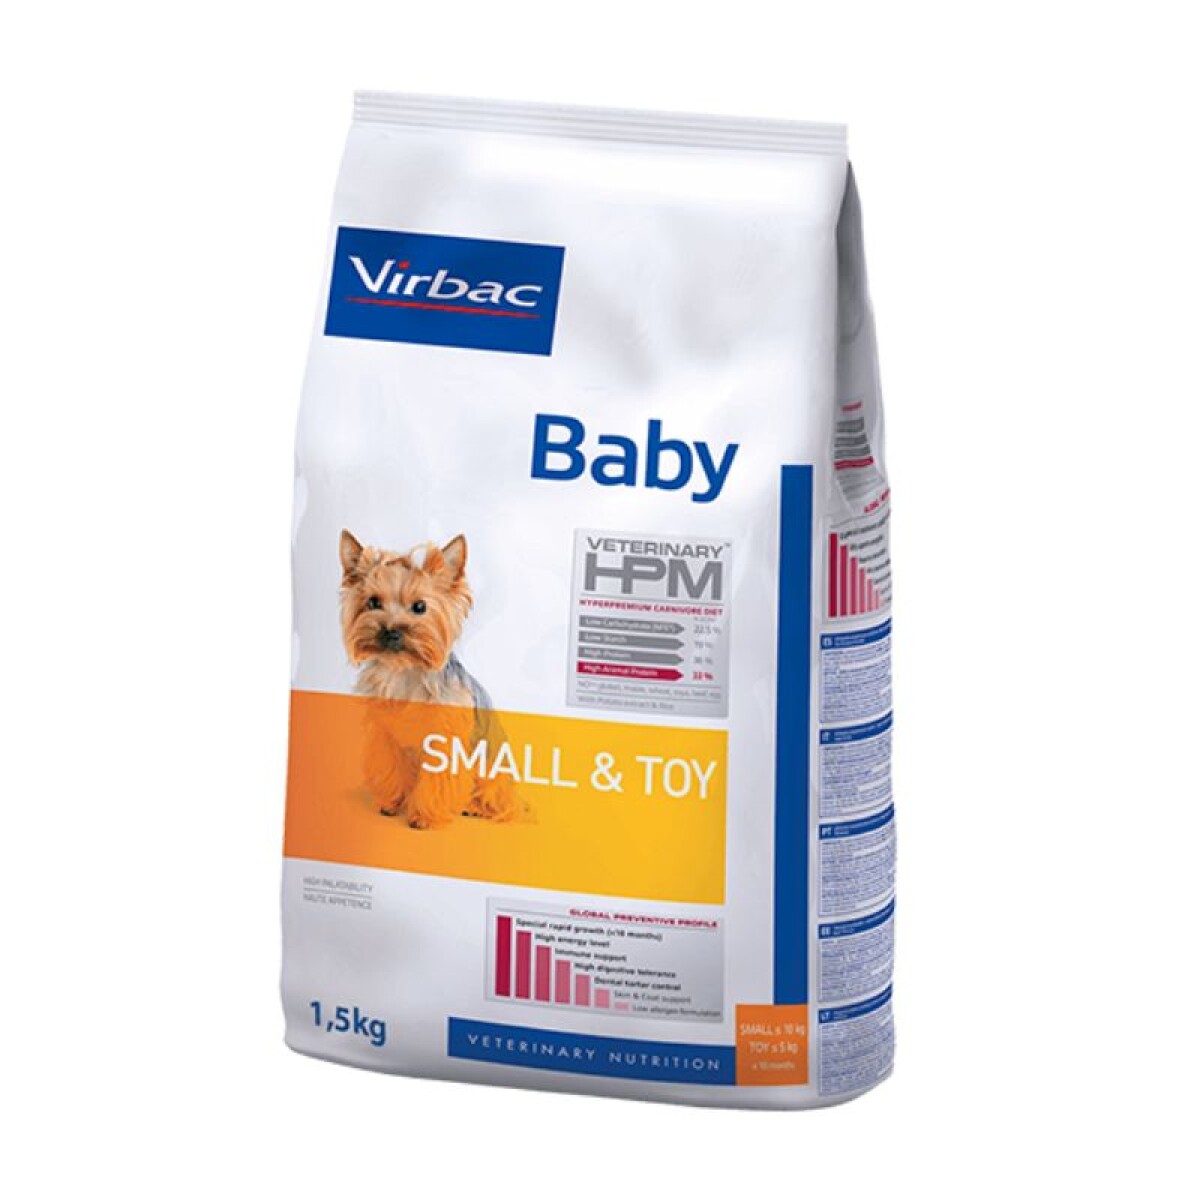 HPM DOG BABY SMALL & TOY 1.5KG - Hpm Dog Baby Small & Toy 1.5kg 